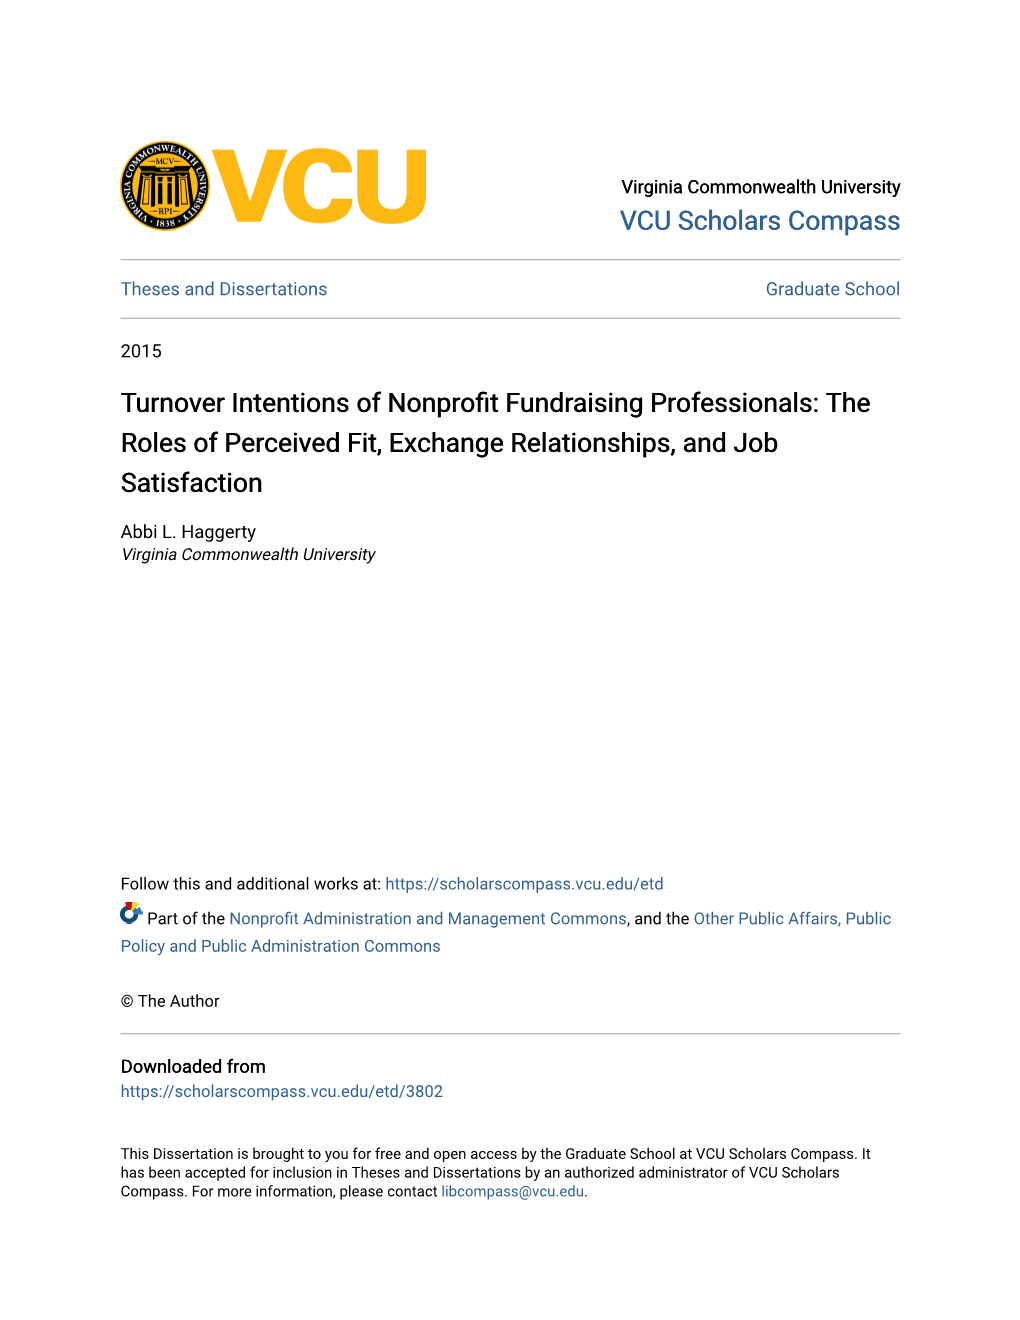 Turnover Intentions of Nonprofit Fundraising Professionals: the Roles of Perceived Fit, Exchange Relationships, and Job Satisfaction